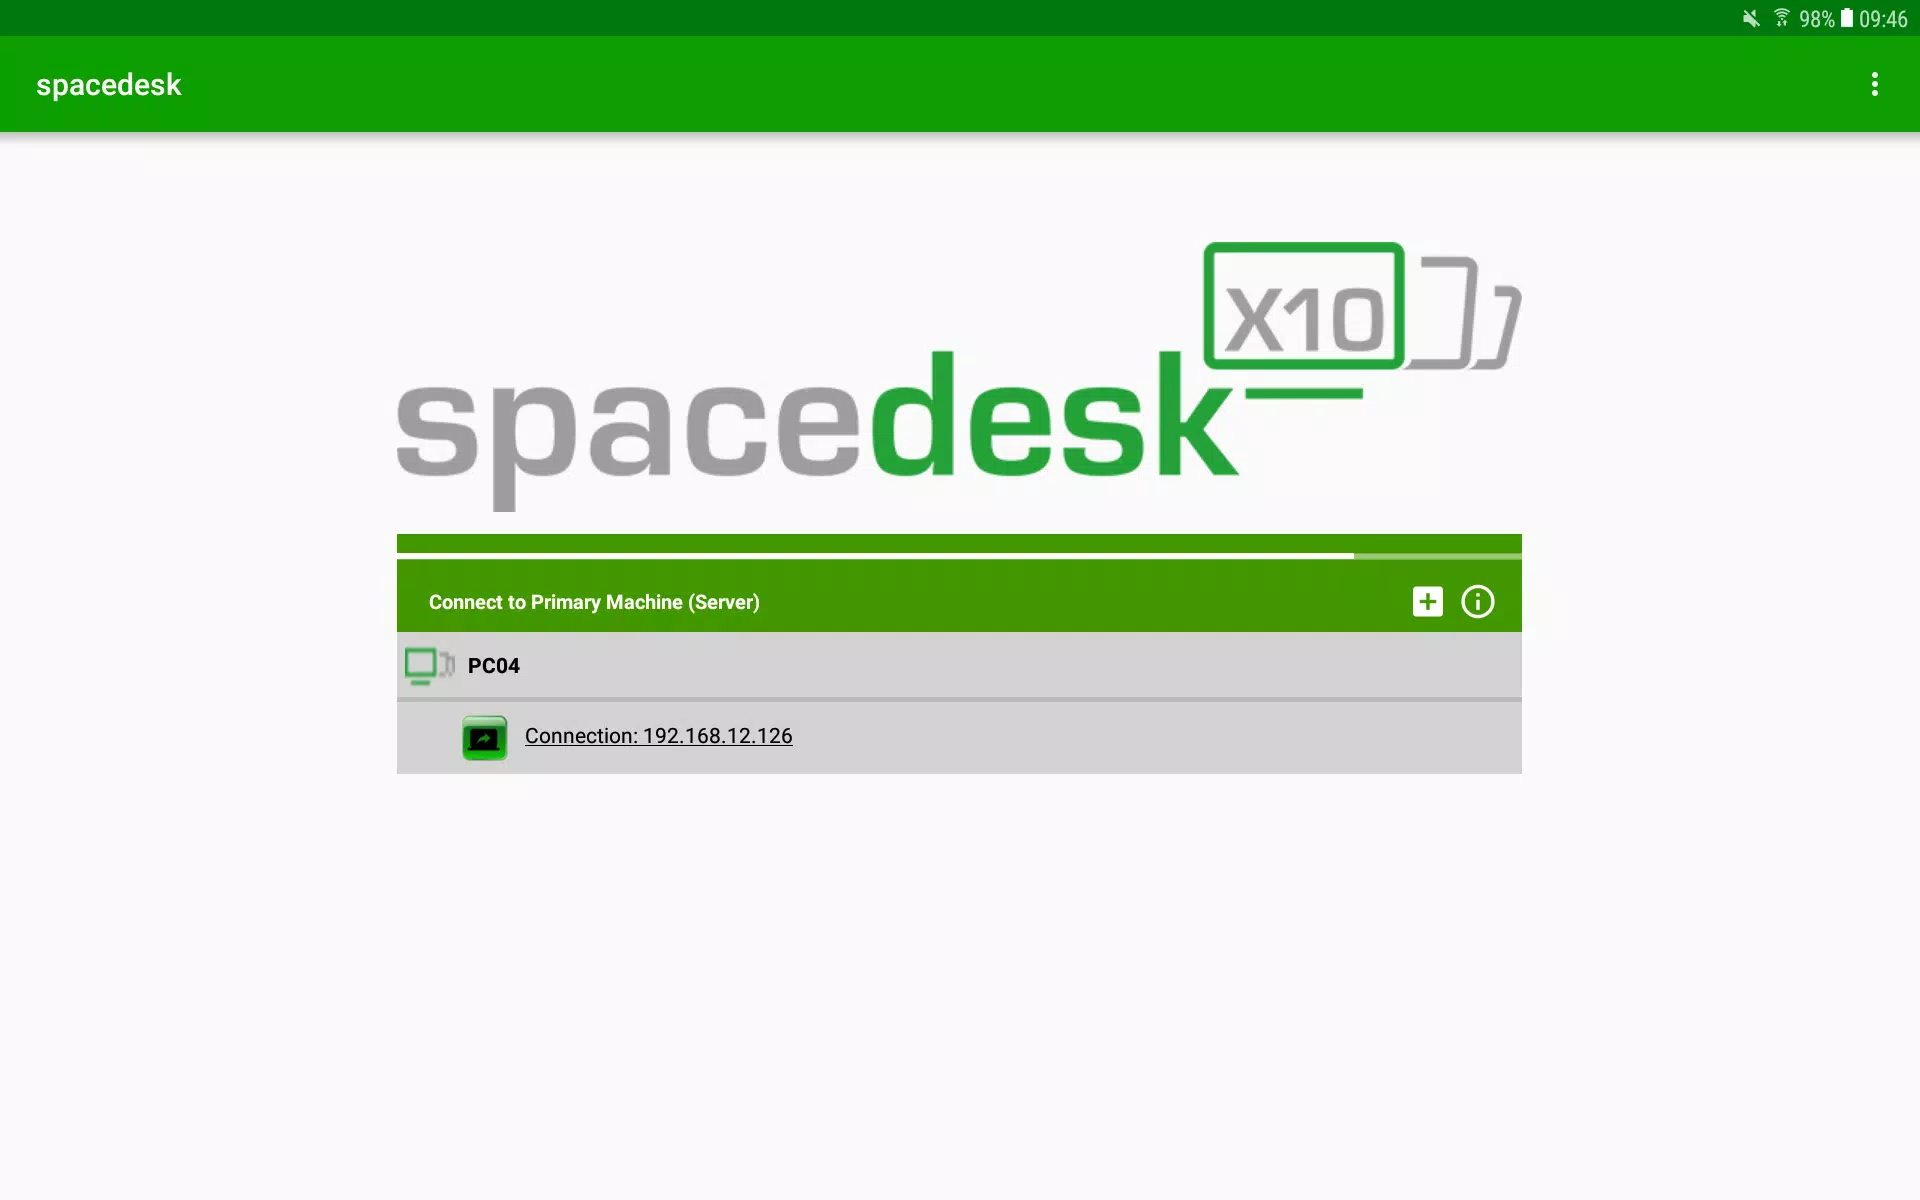 spacedesk for Android - APK Download